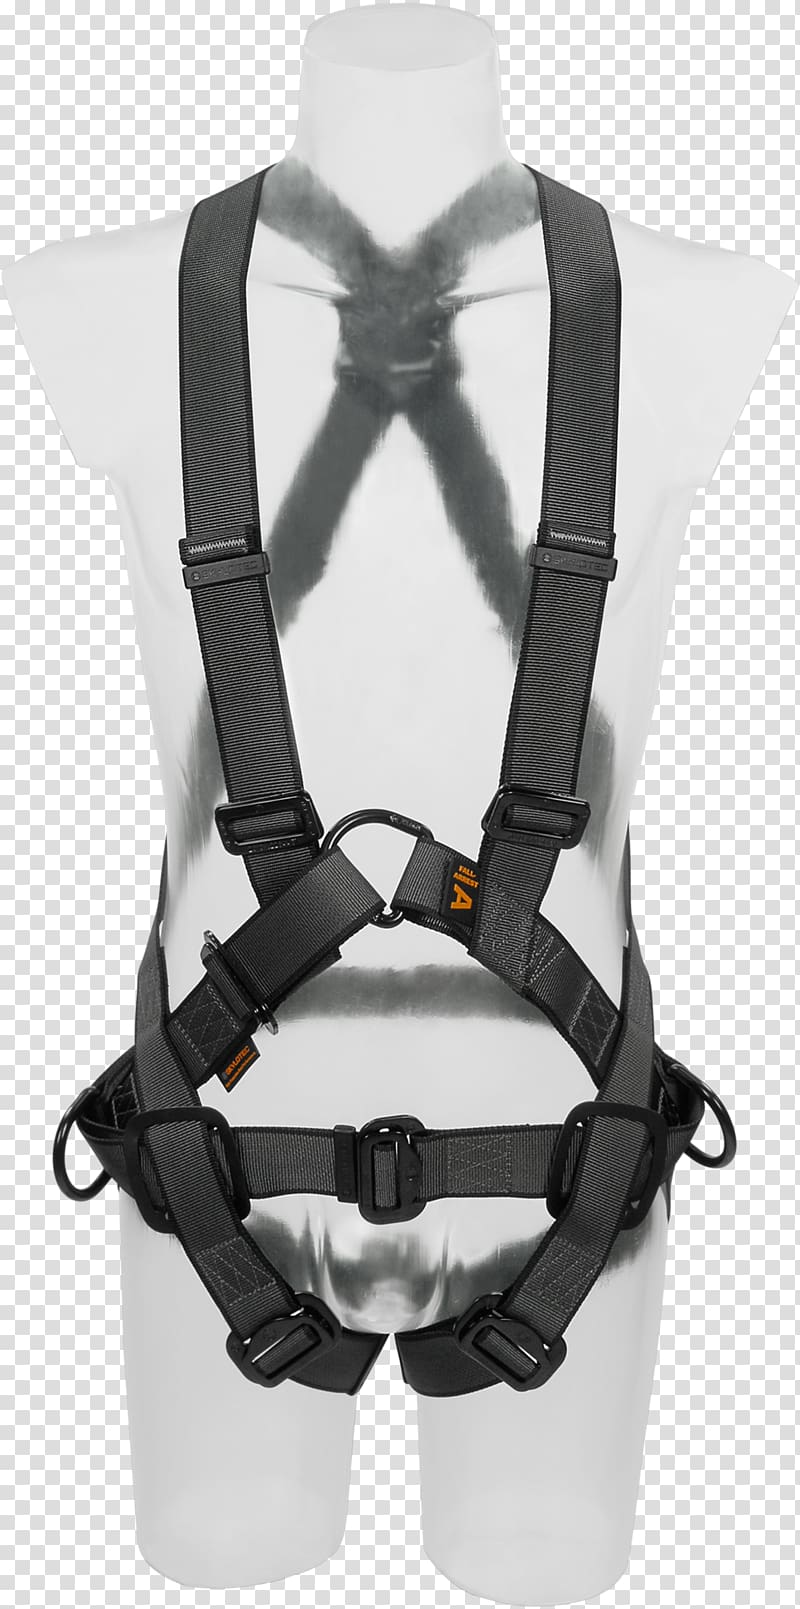 Climbing Harnesses Flame retardant SKYLOTEC Webbing, Fall Protection transparent background PNG clipart